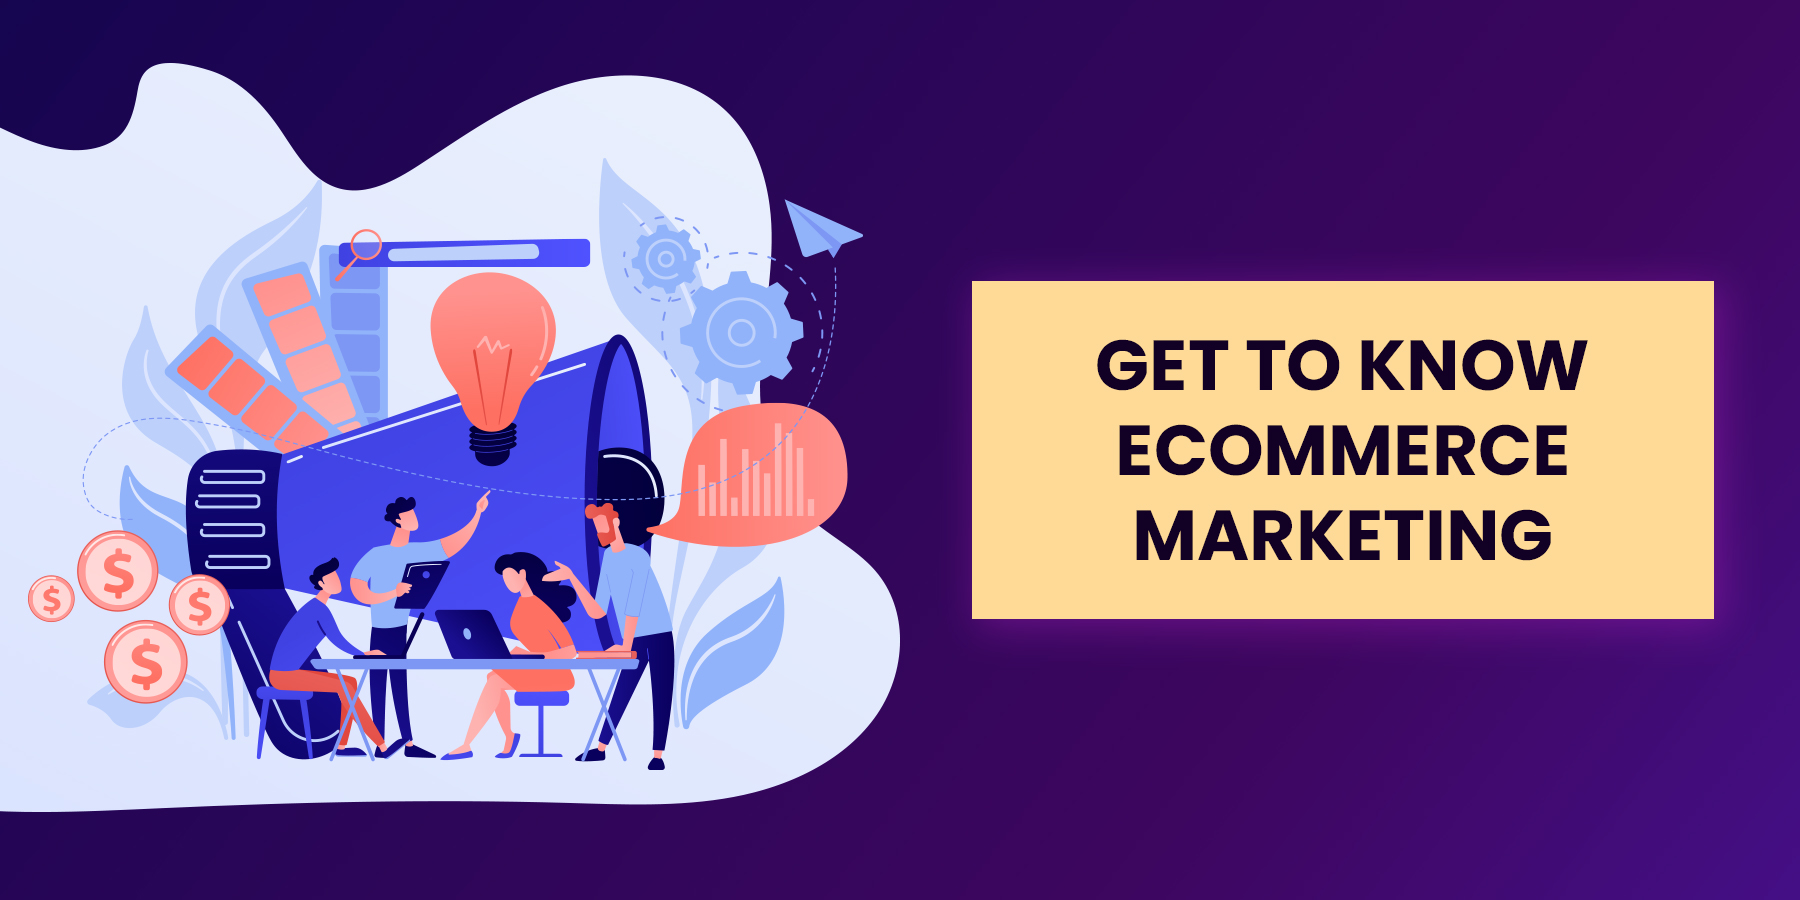 Five things you need to know about e-commerce marketing